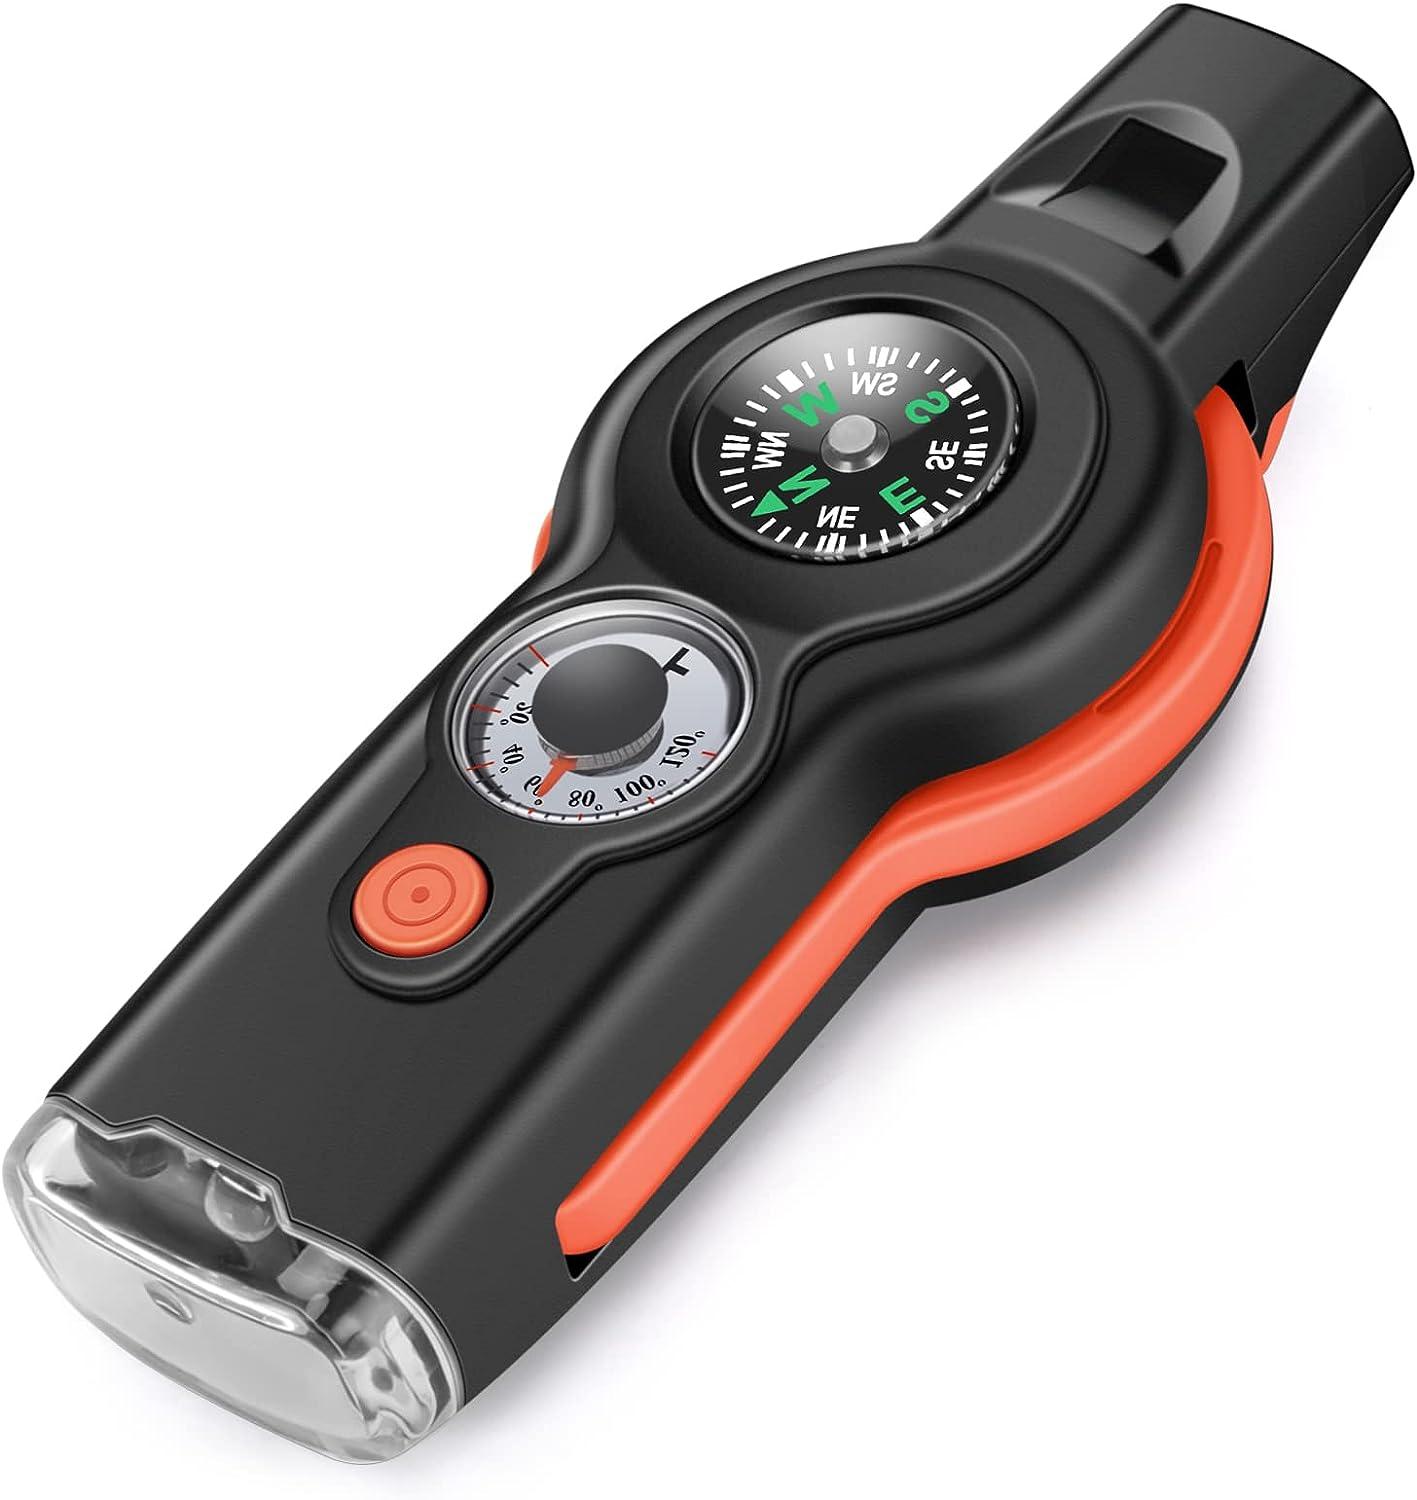 7 in 1 Emergency Survival Camping Hiking Whistle Compass Thermometer LED